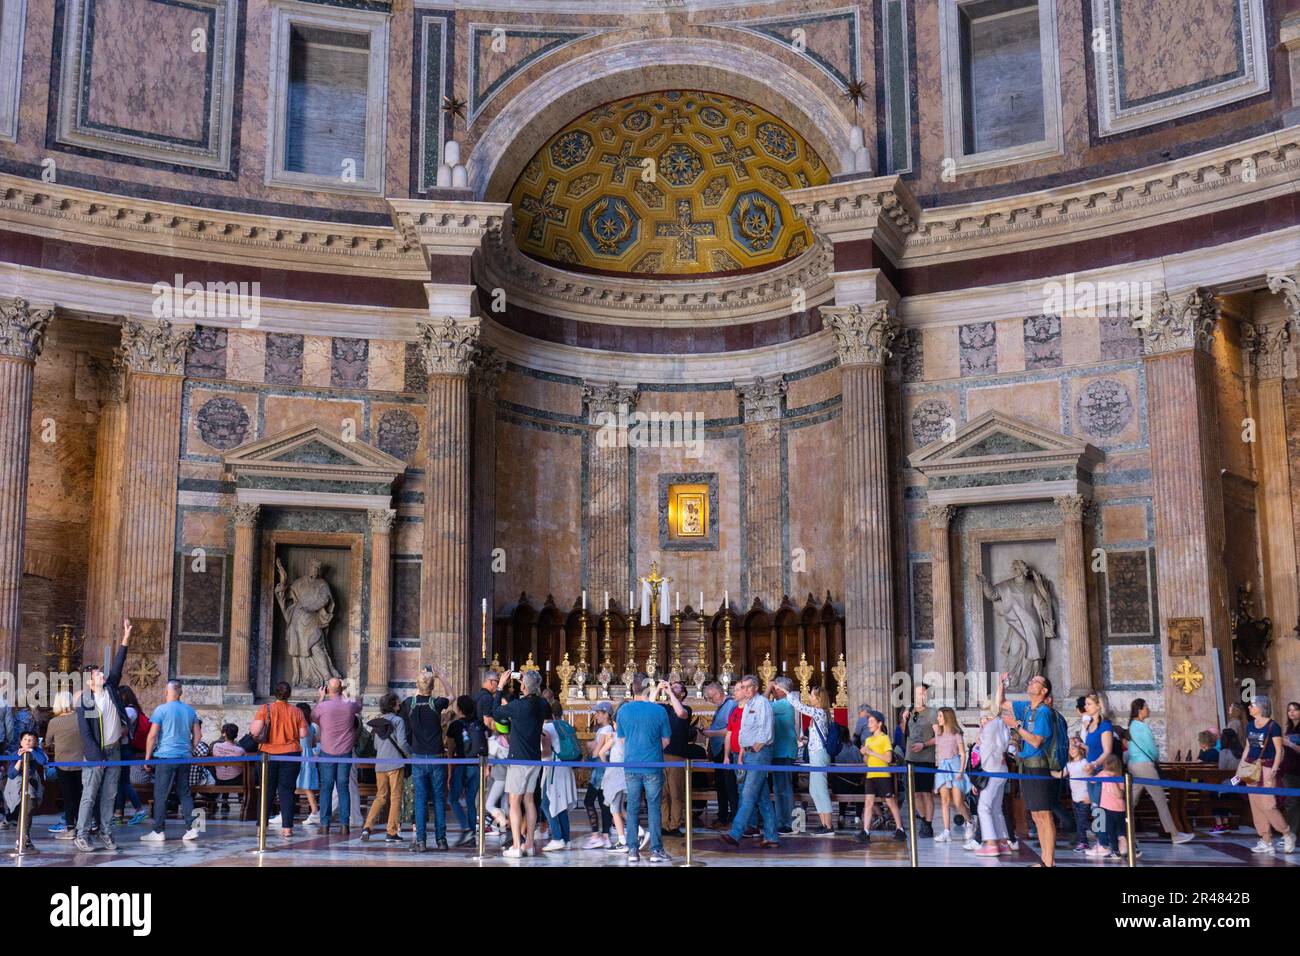 The Pantheon is a former Roman temple and, since 609 AD, a Catholic church in Rome, Italy. Stock Photo